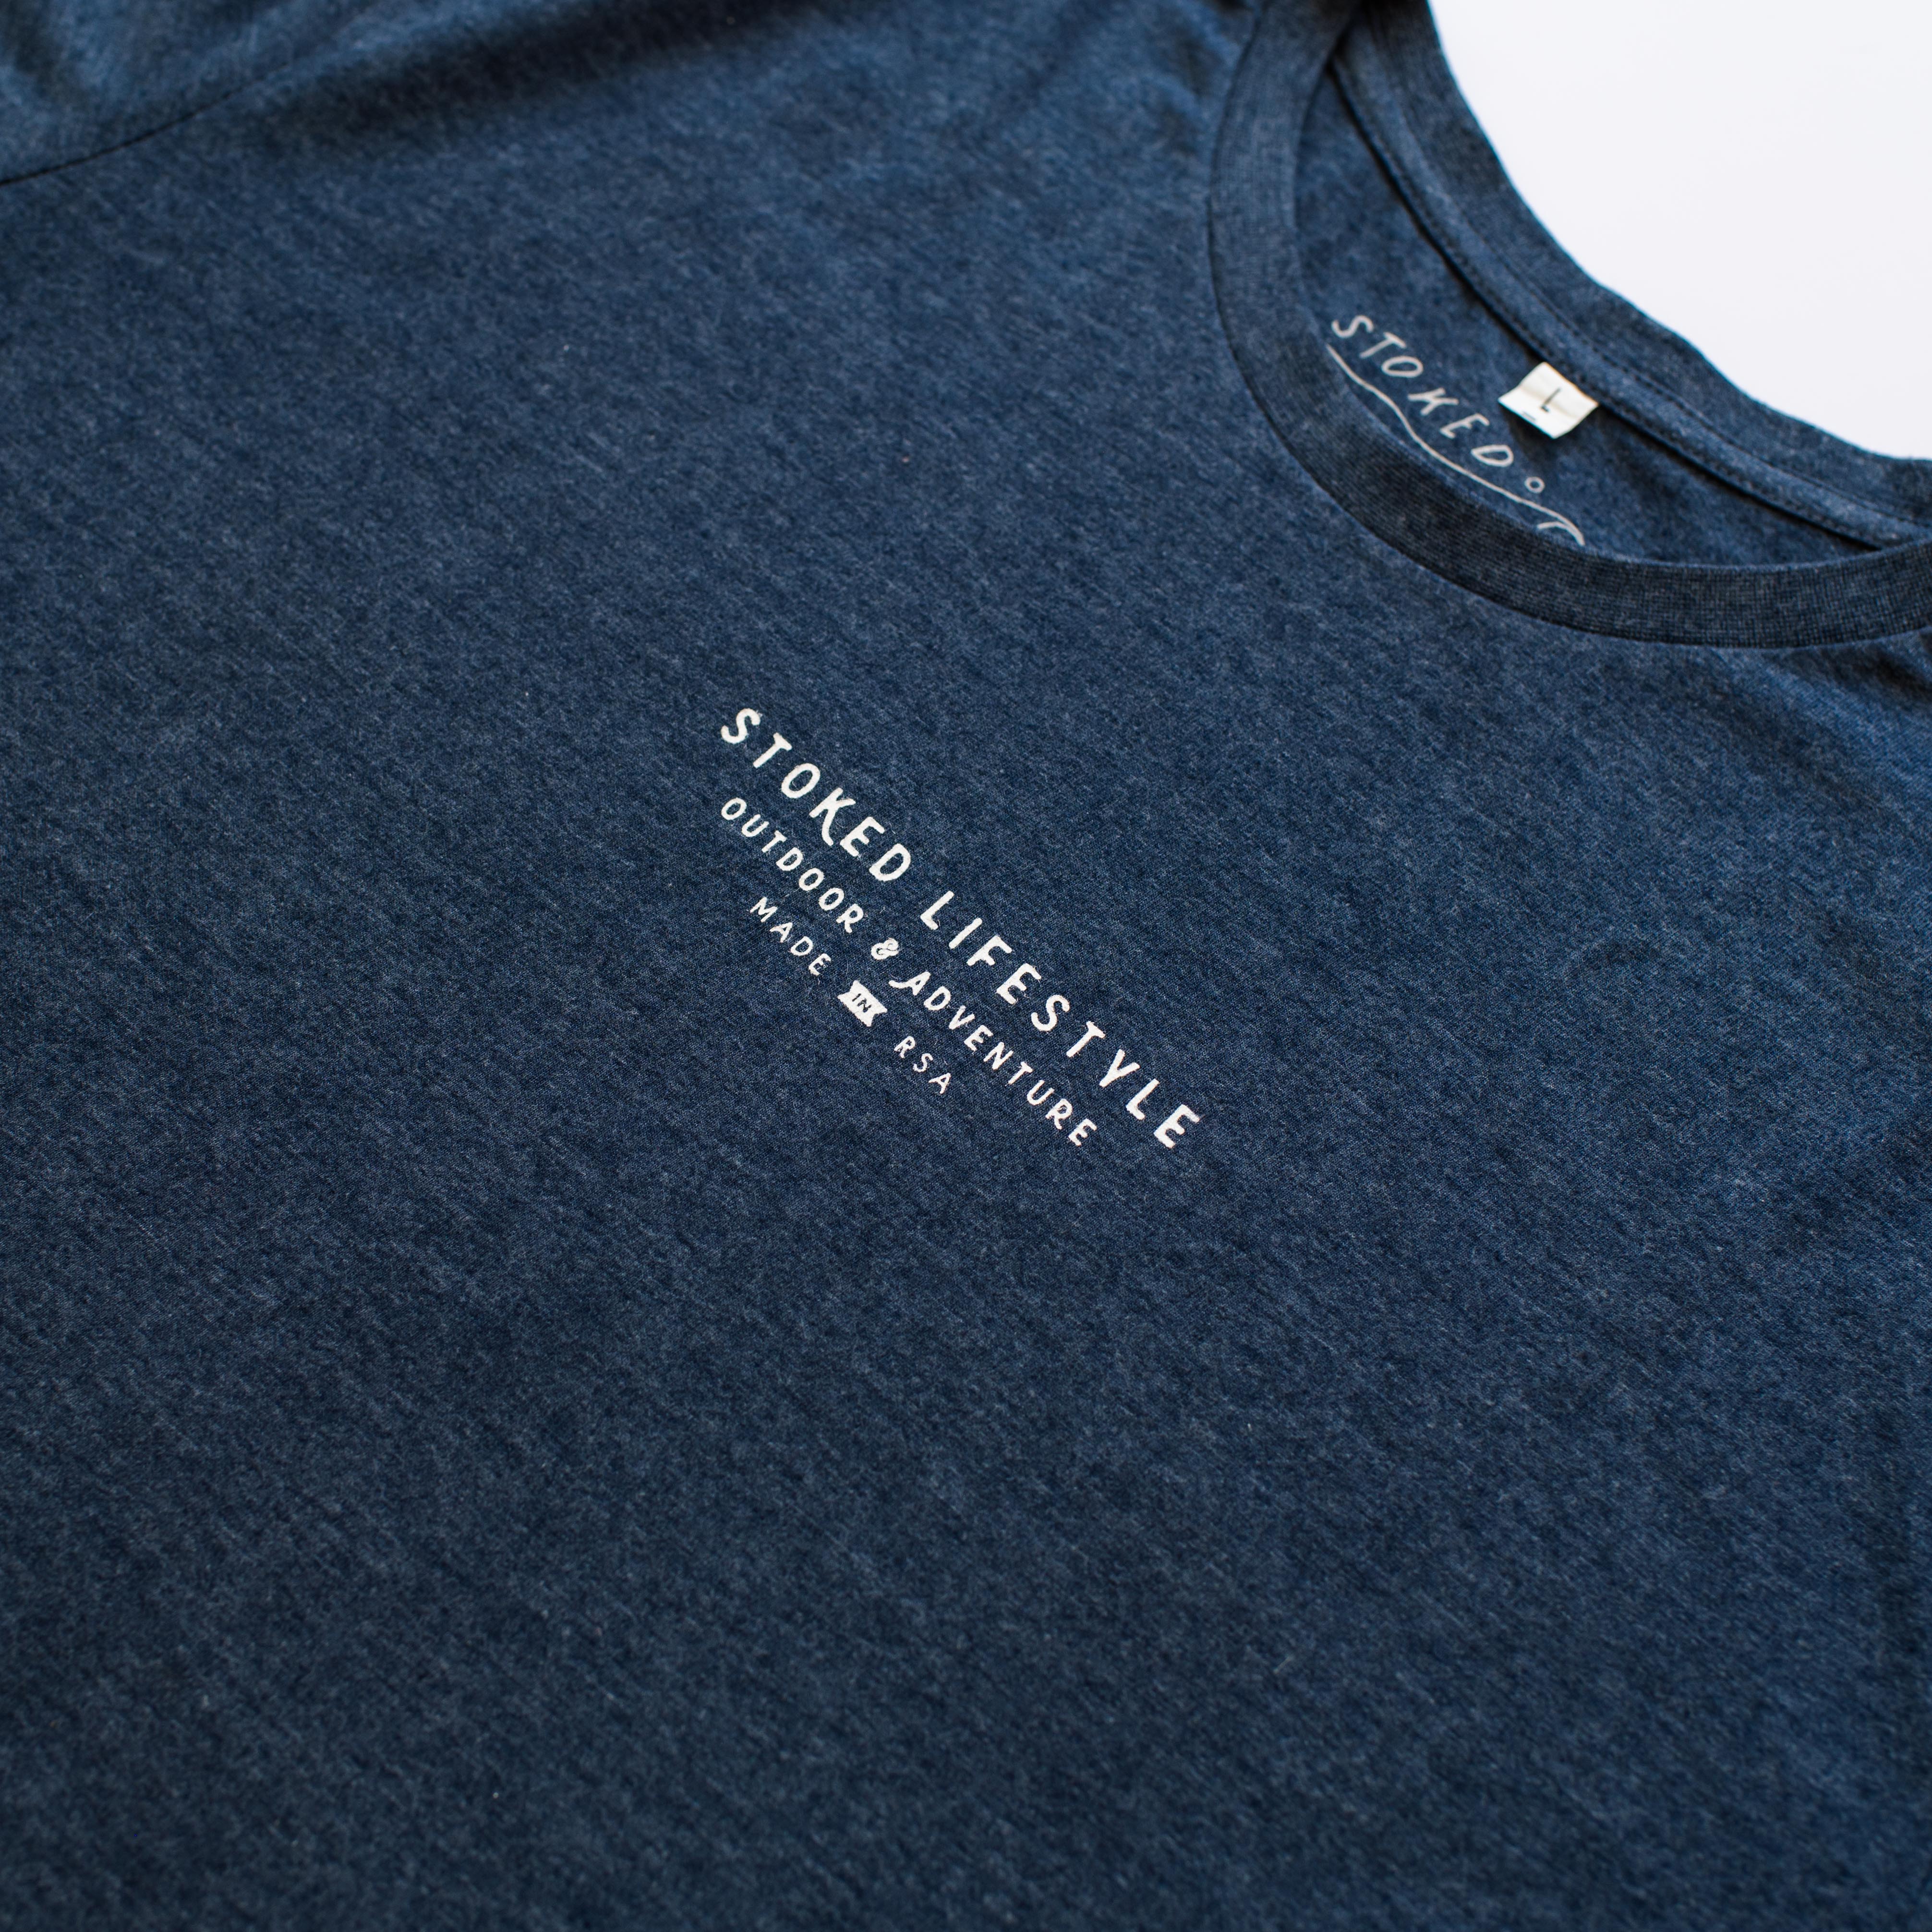 Dusk Navy Minimal Lifestyle T-Shirt - Stokedthebrand. Lifestyle products for outdoor adventures. Made in South Africa